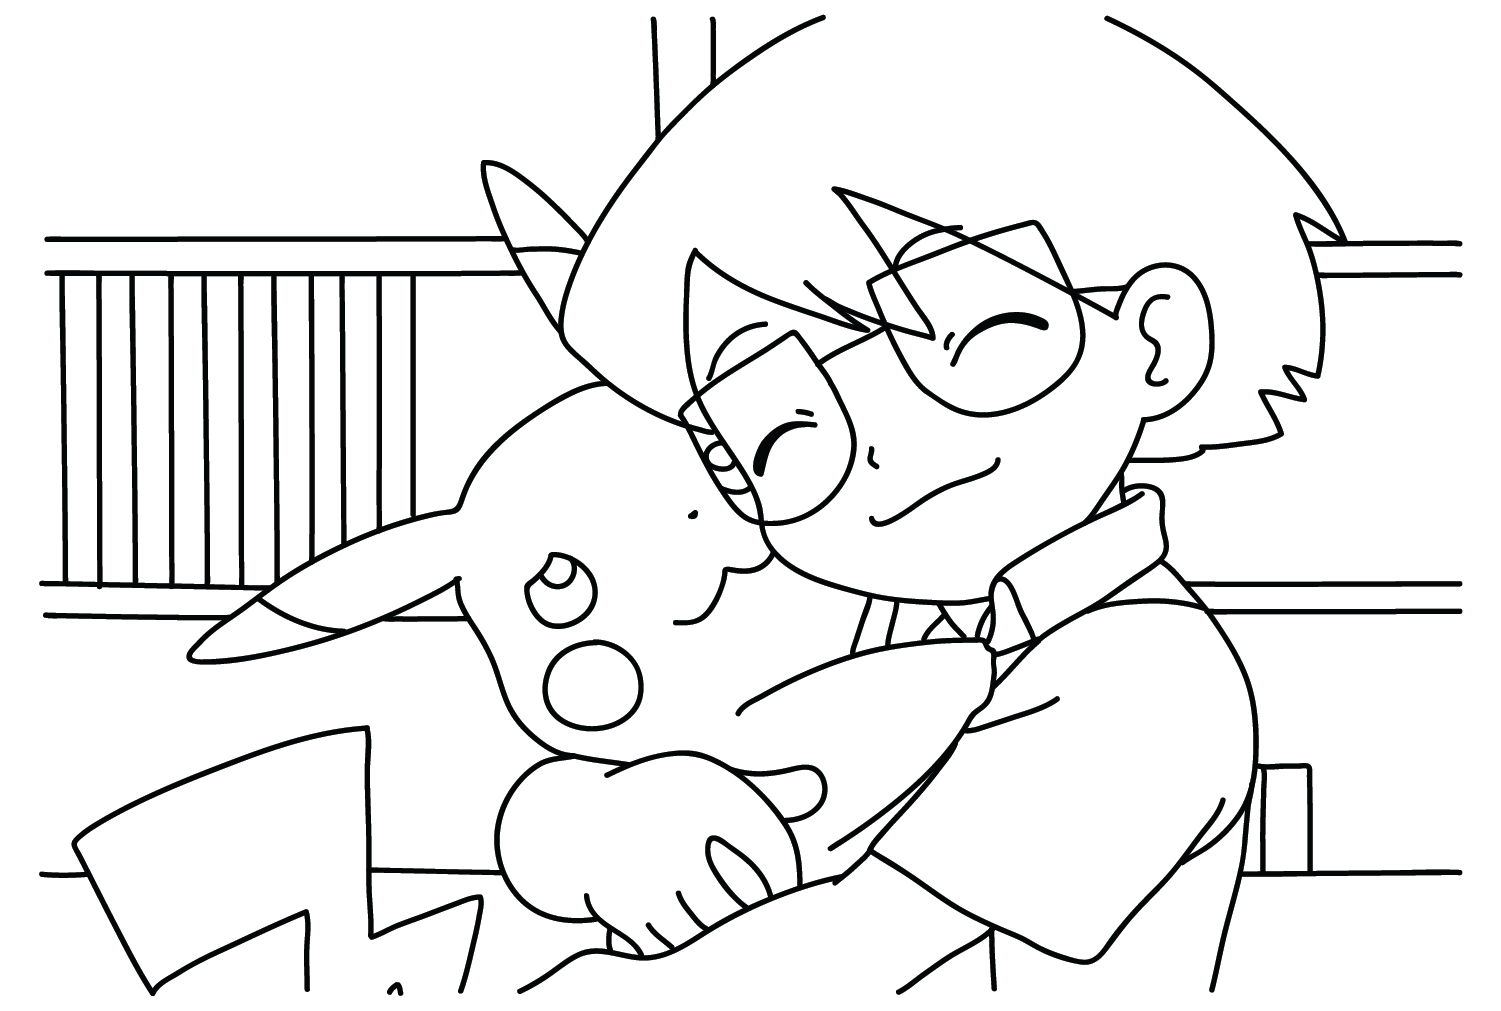 Max and Pikachu Pokemon To Color